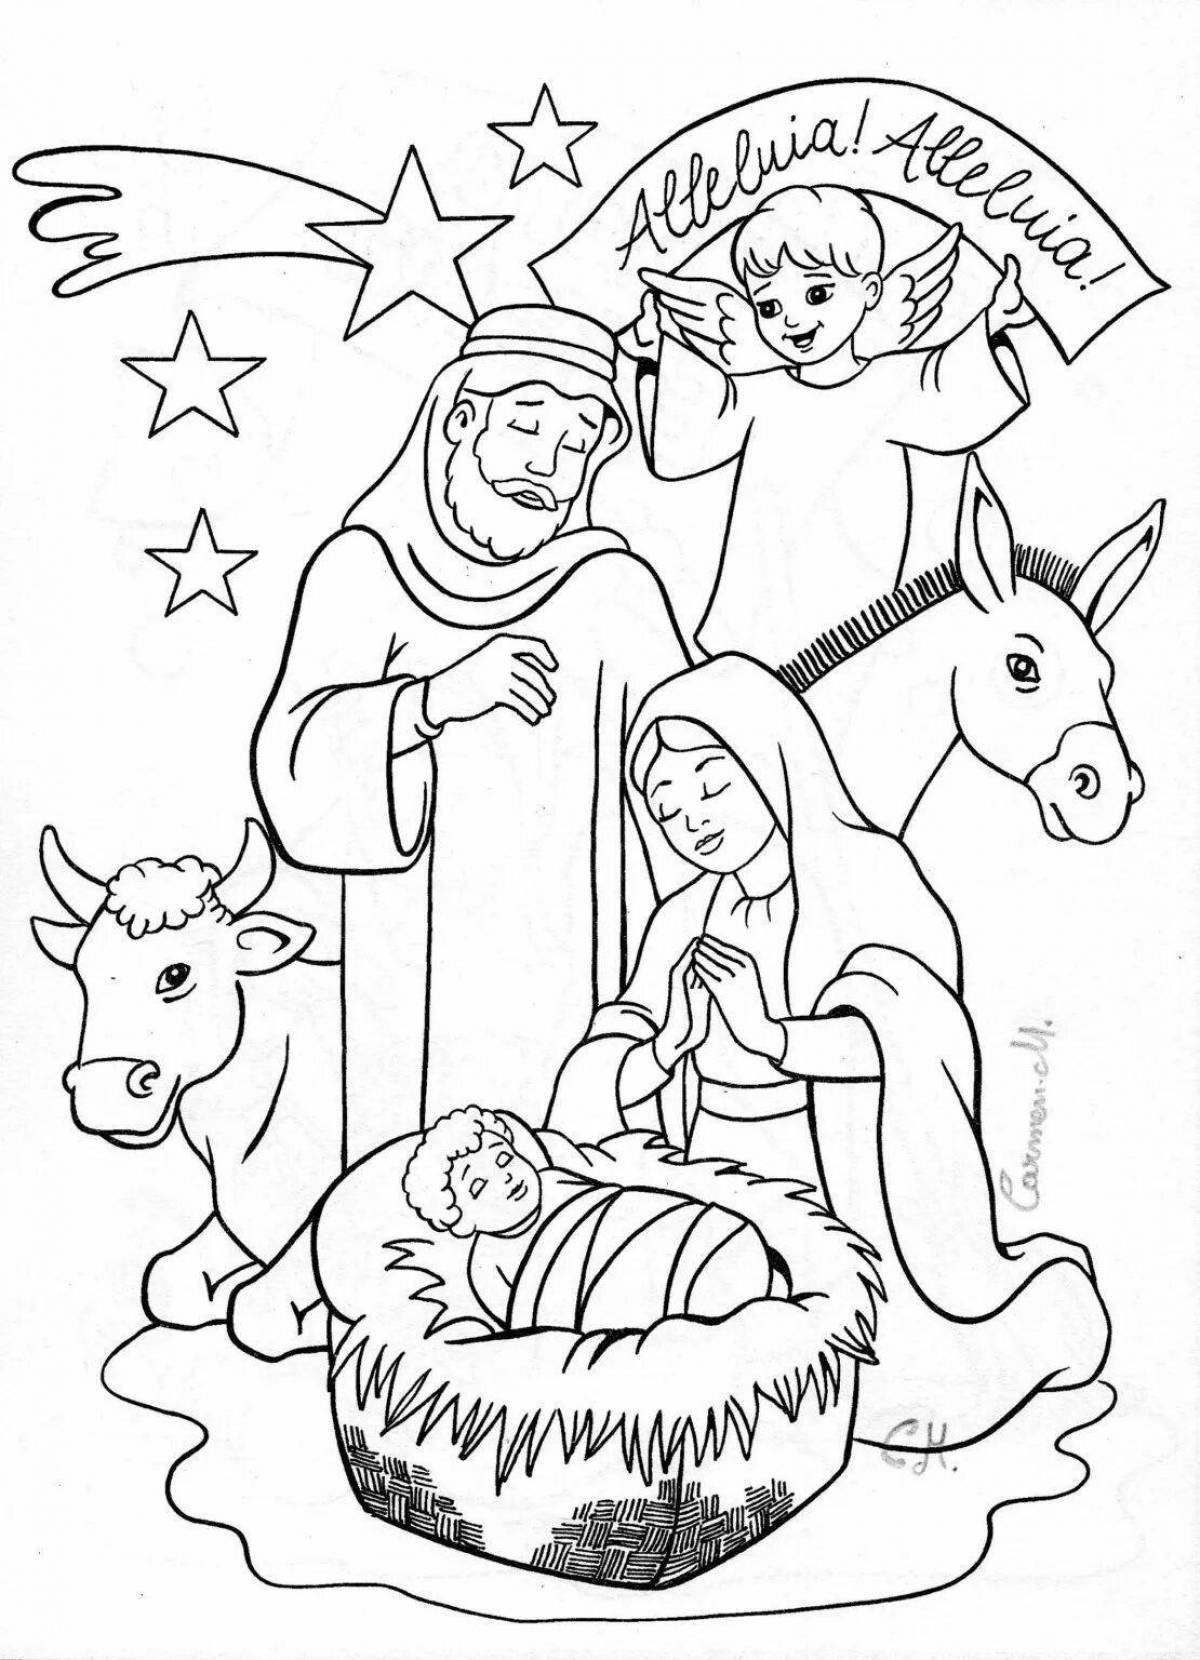 A fun Christmas coloring book for 4-5 year olds